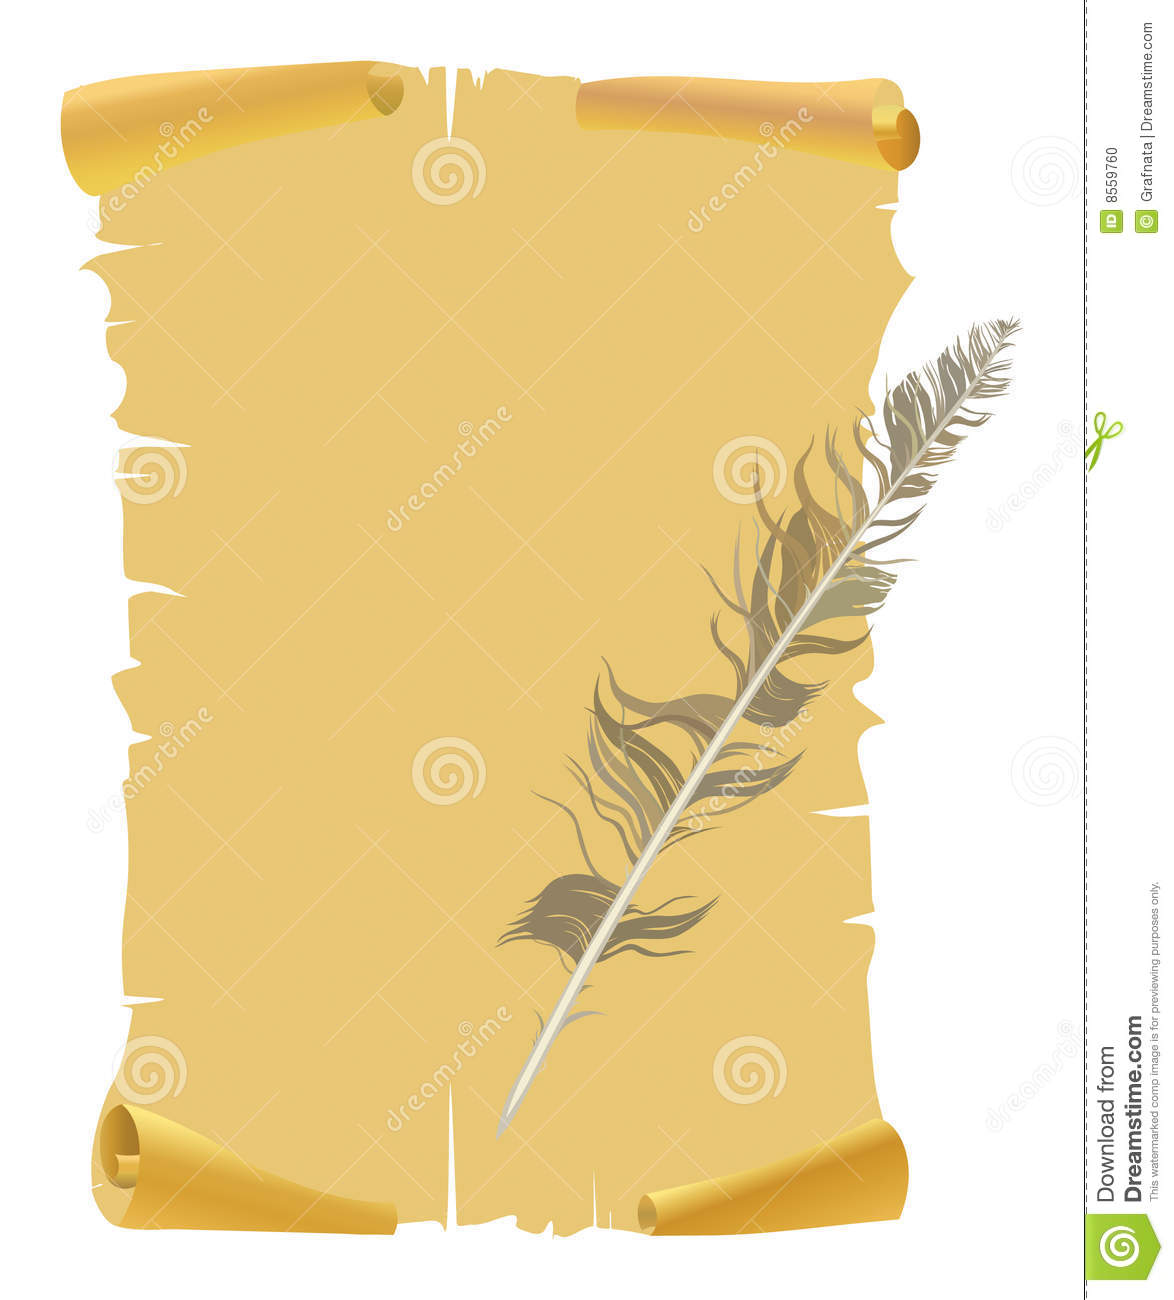 Yellow Old Paper With Feather Stock Photo   Image  8559760